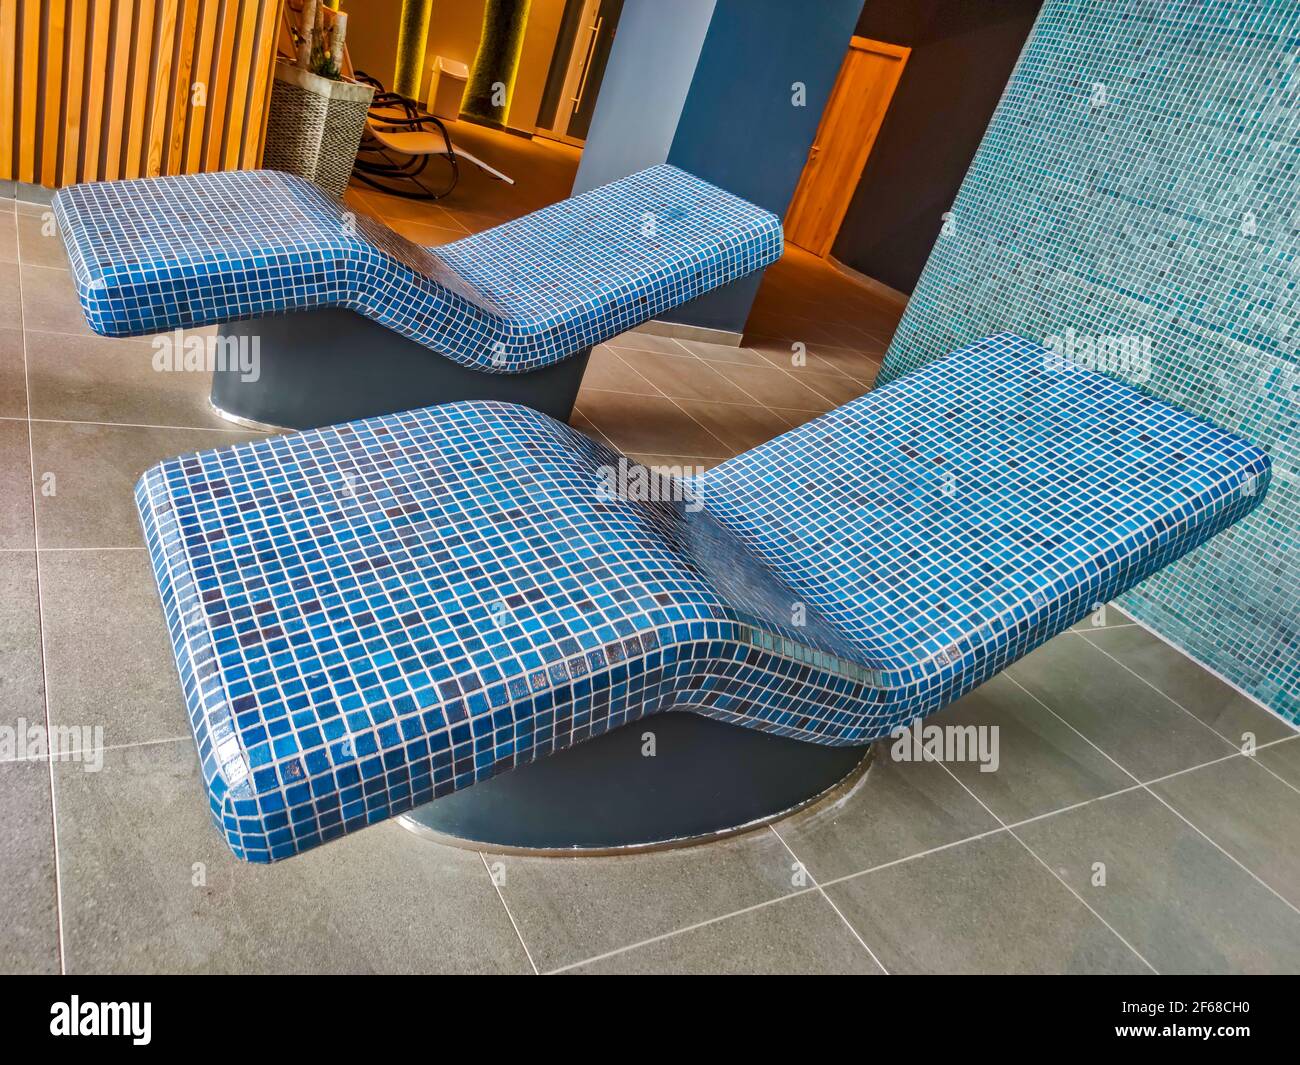 Warm chair in the sauna relaxation room Stock Photo - Alamy